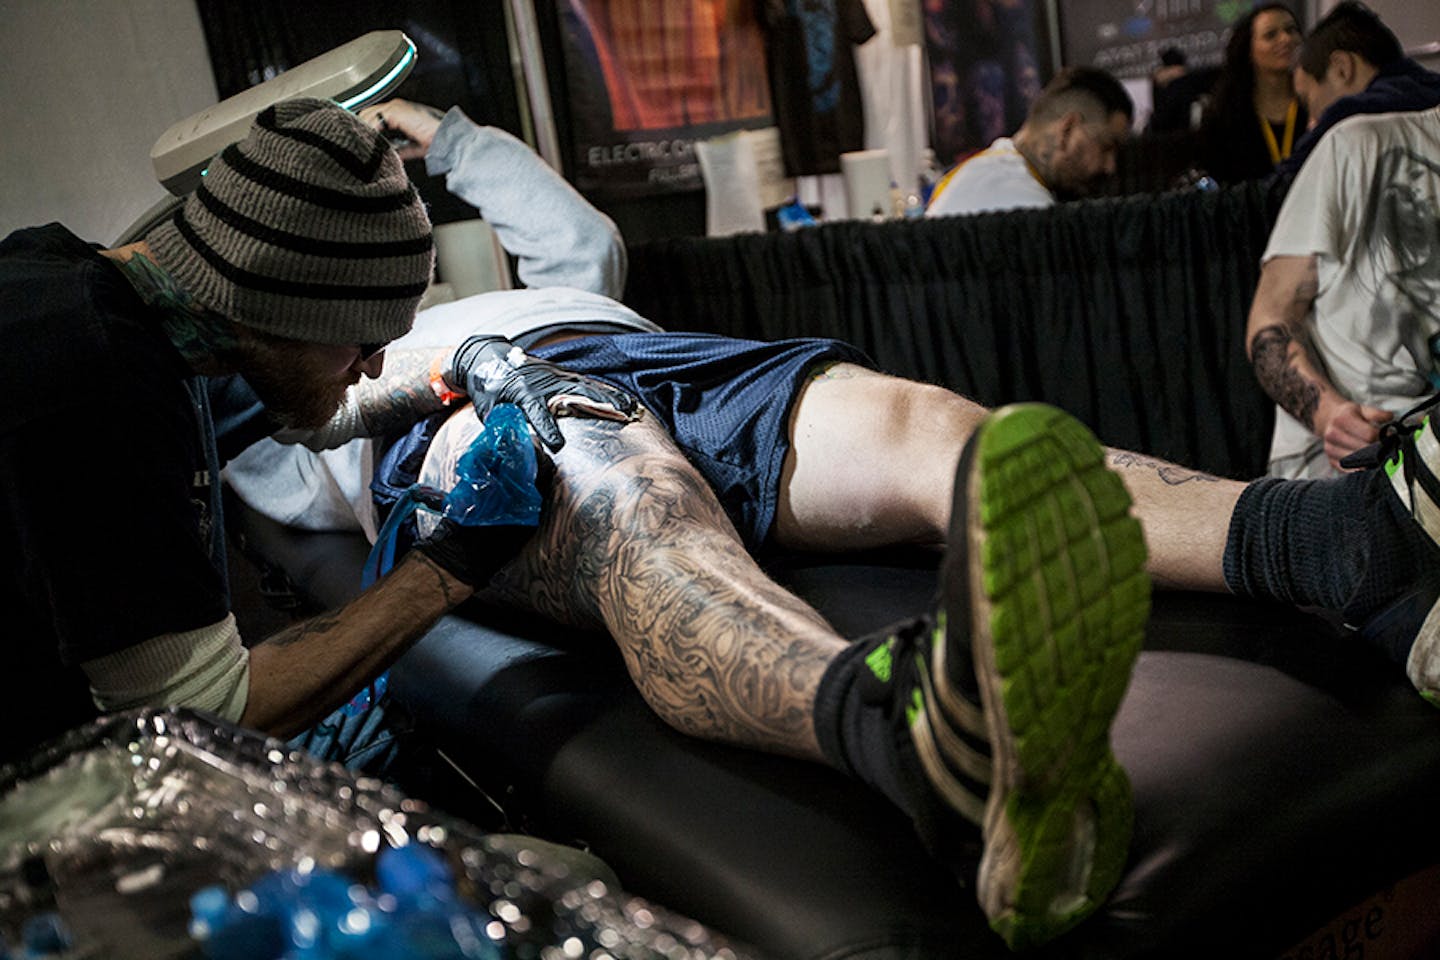 All-female tattoo shop makes its mark in male-dominated field | MPR News